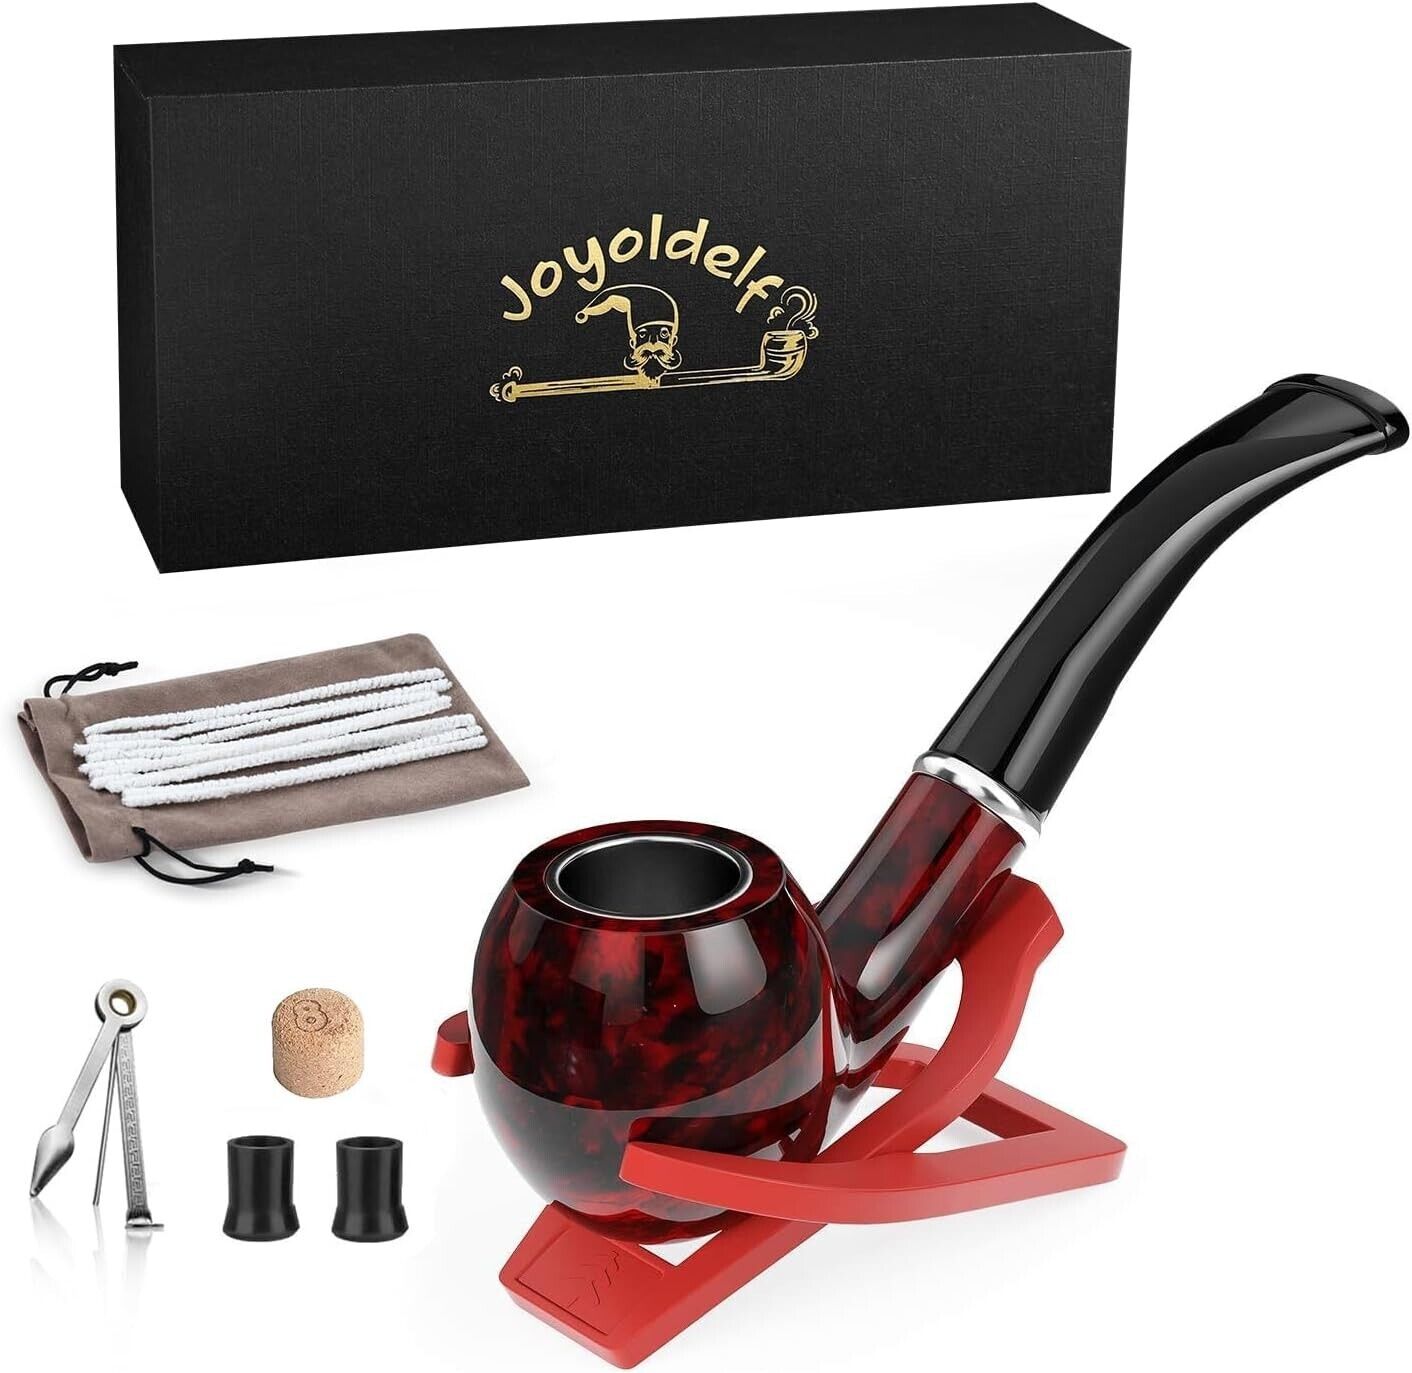 Joyoldelf Tobacco Pipe, Classic Smoking Pipe with Foldable Tobacco Pipe Stand, B